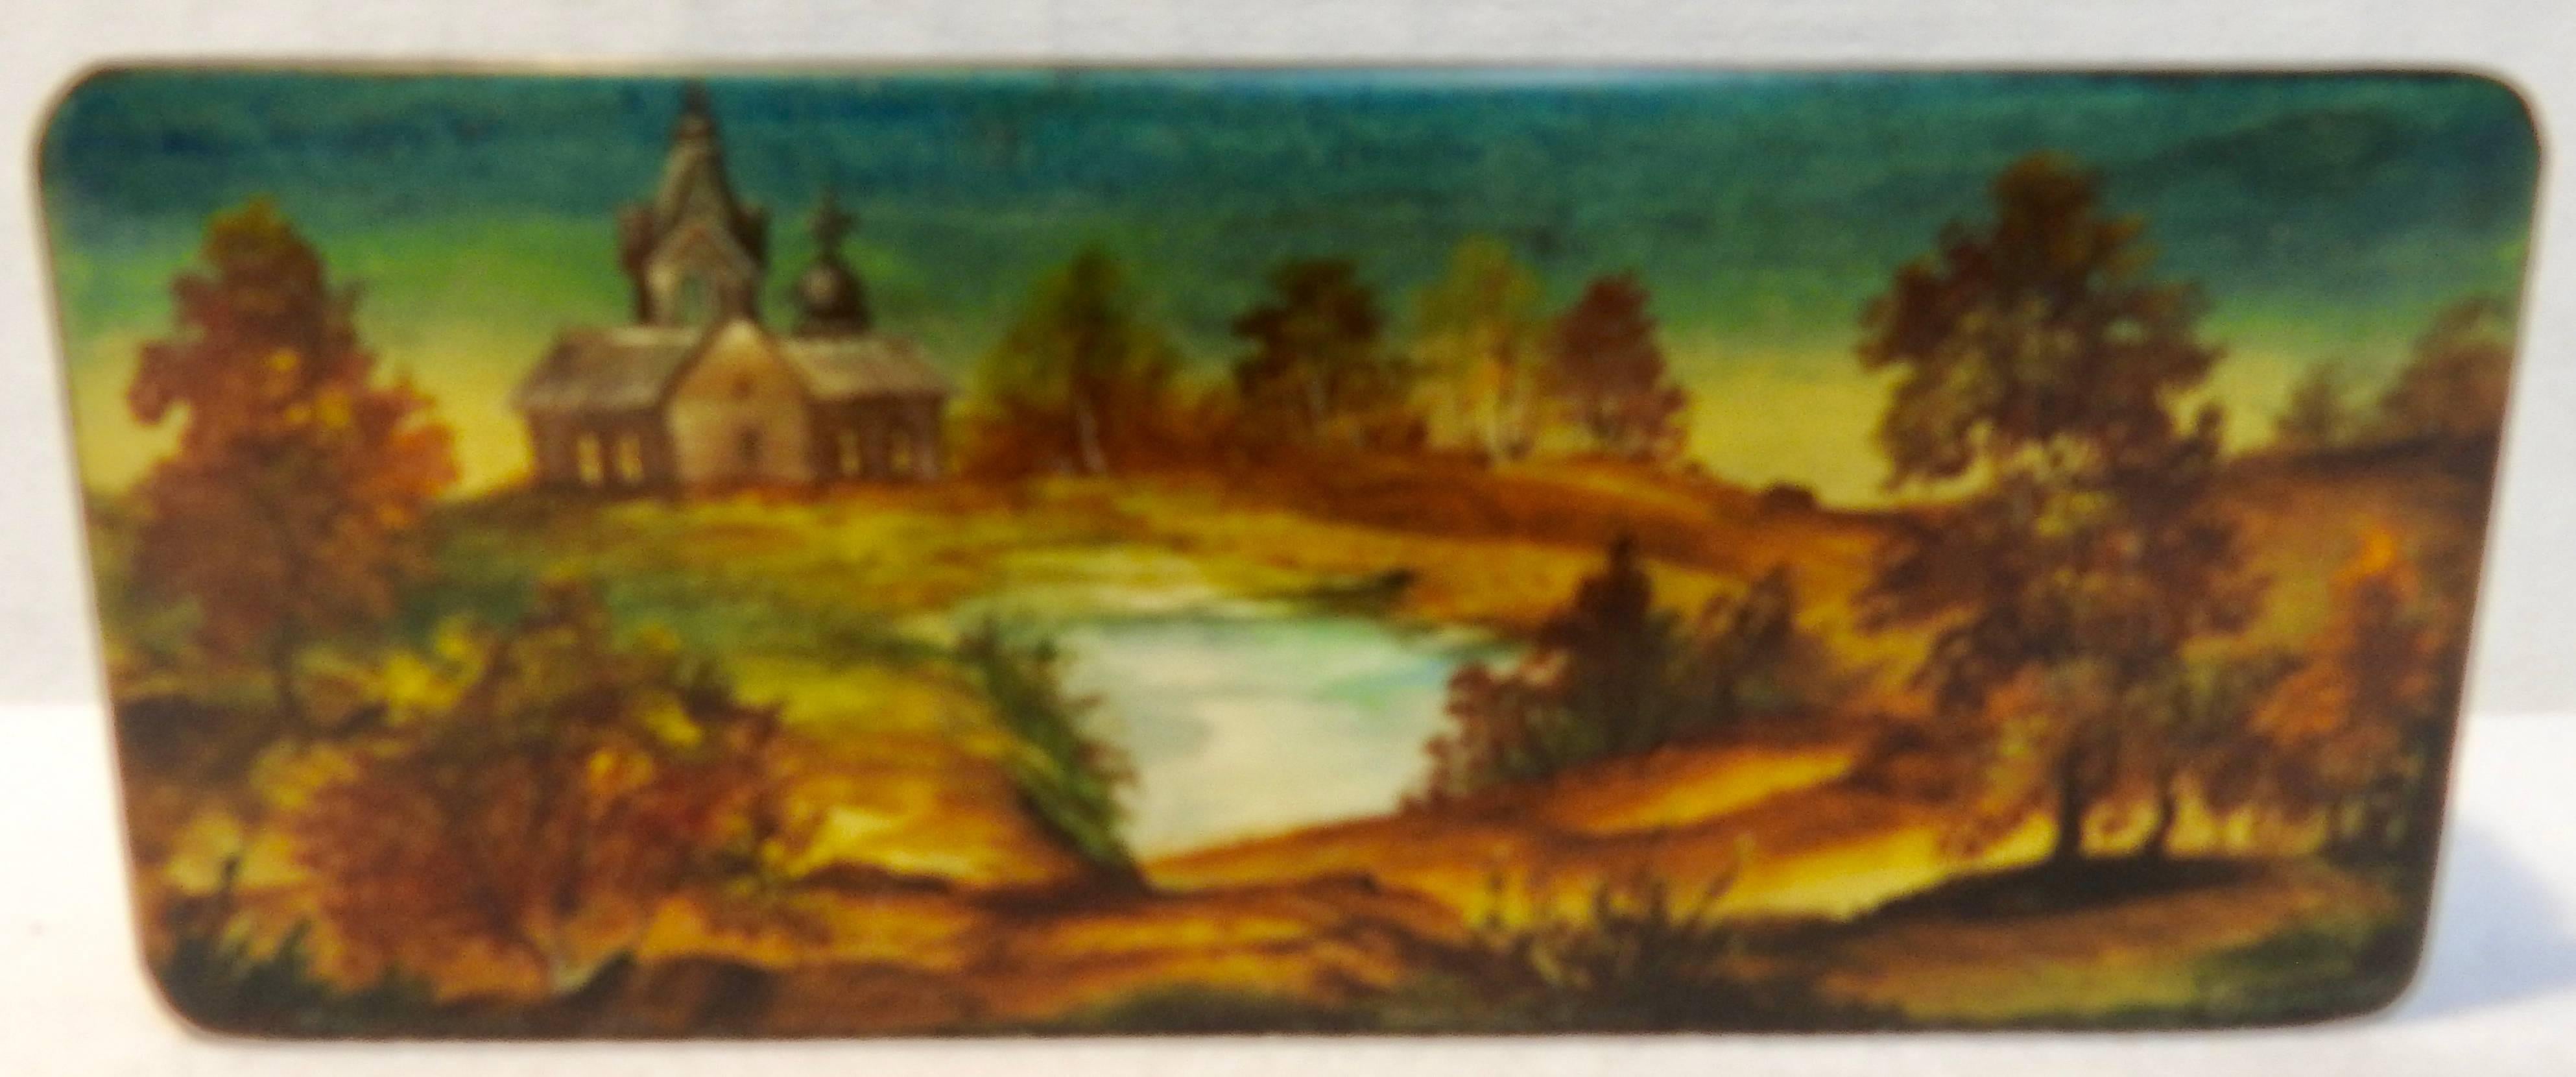 We are offering a small Russian black lacquer box that has been hand painted. The mother of pearl river scene is surrounded by rolling hills with trees and a fabulous building in the background. The warm colors on the lid are beautiful. The lid